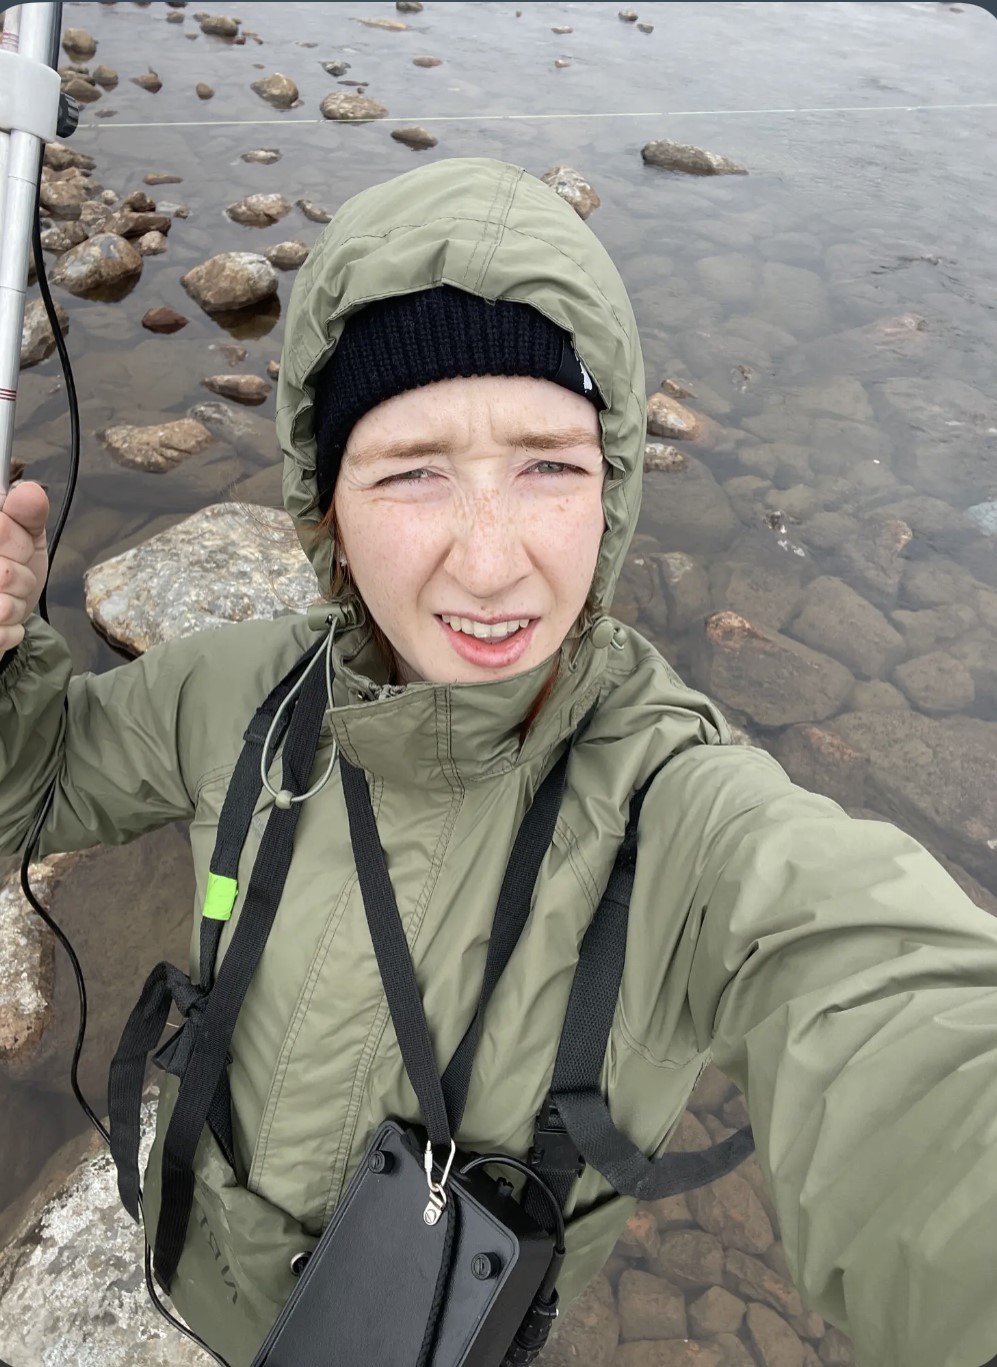 Selfie of Grace Ayers, standing in a shallow pool of water with visible large stones under approximately 10cm of water. Grace is wearing an olive green rain jacket with the hood pulled up and has a black toque underneath. Grace is holding a piece of equipment (a silver colored rod) just out of view on the left of the image. Grace is carrying a small black bag across their front.